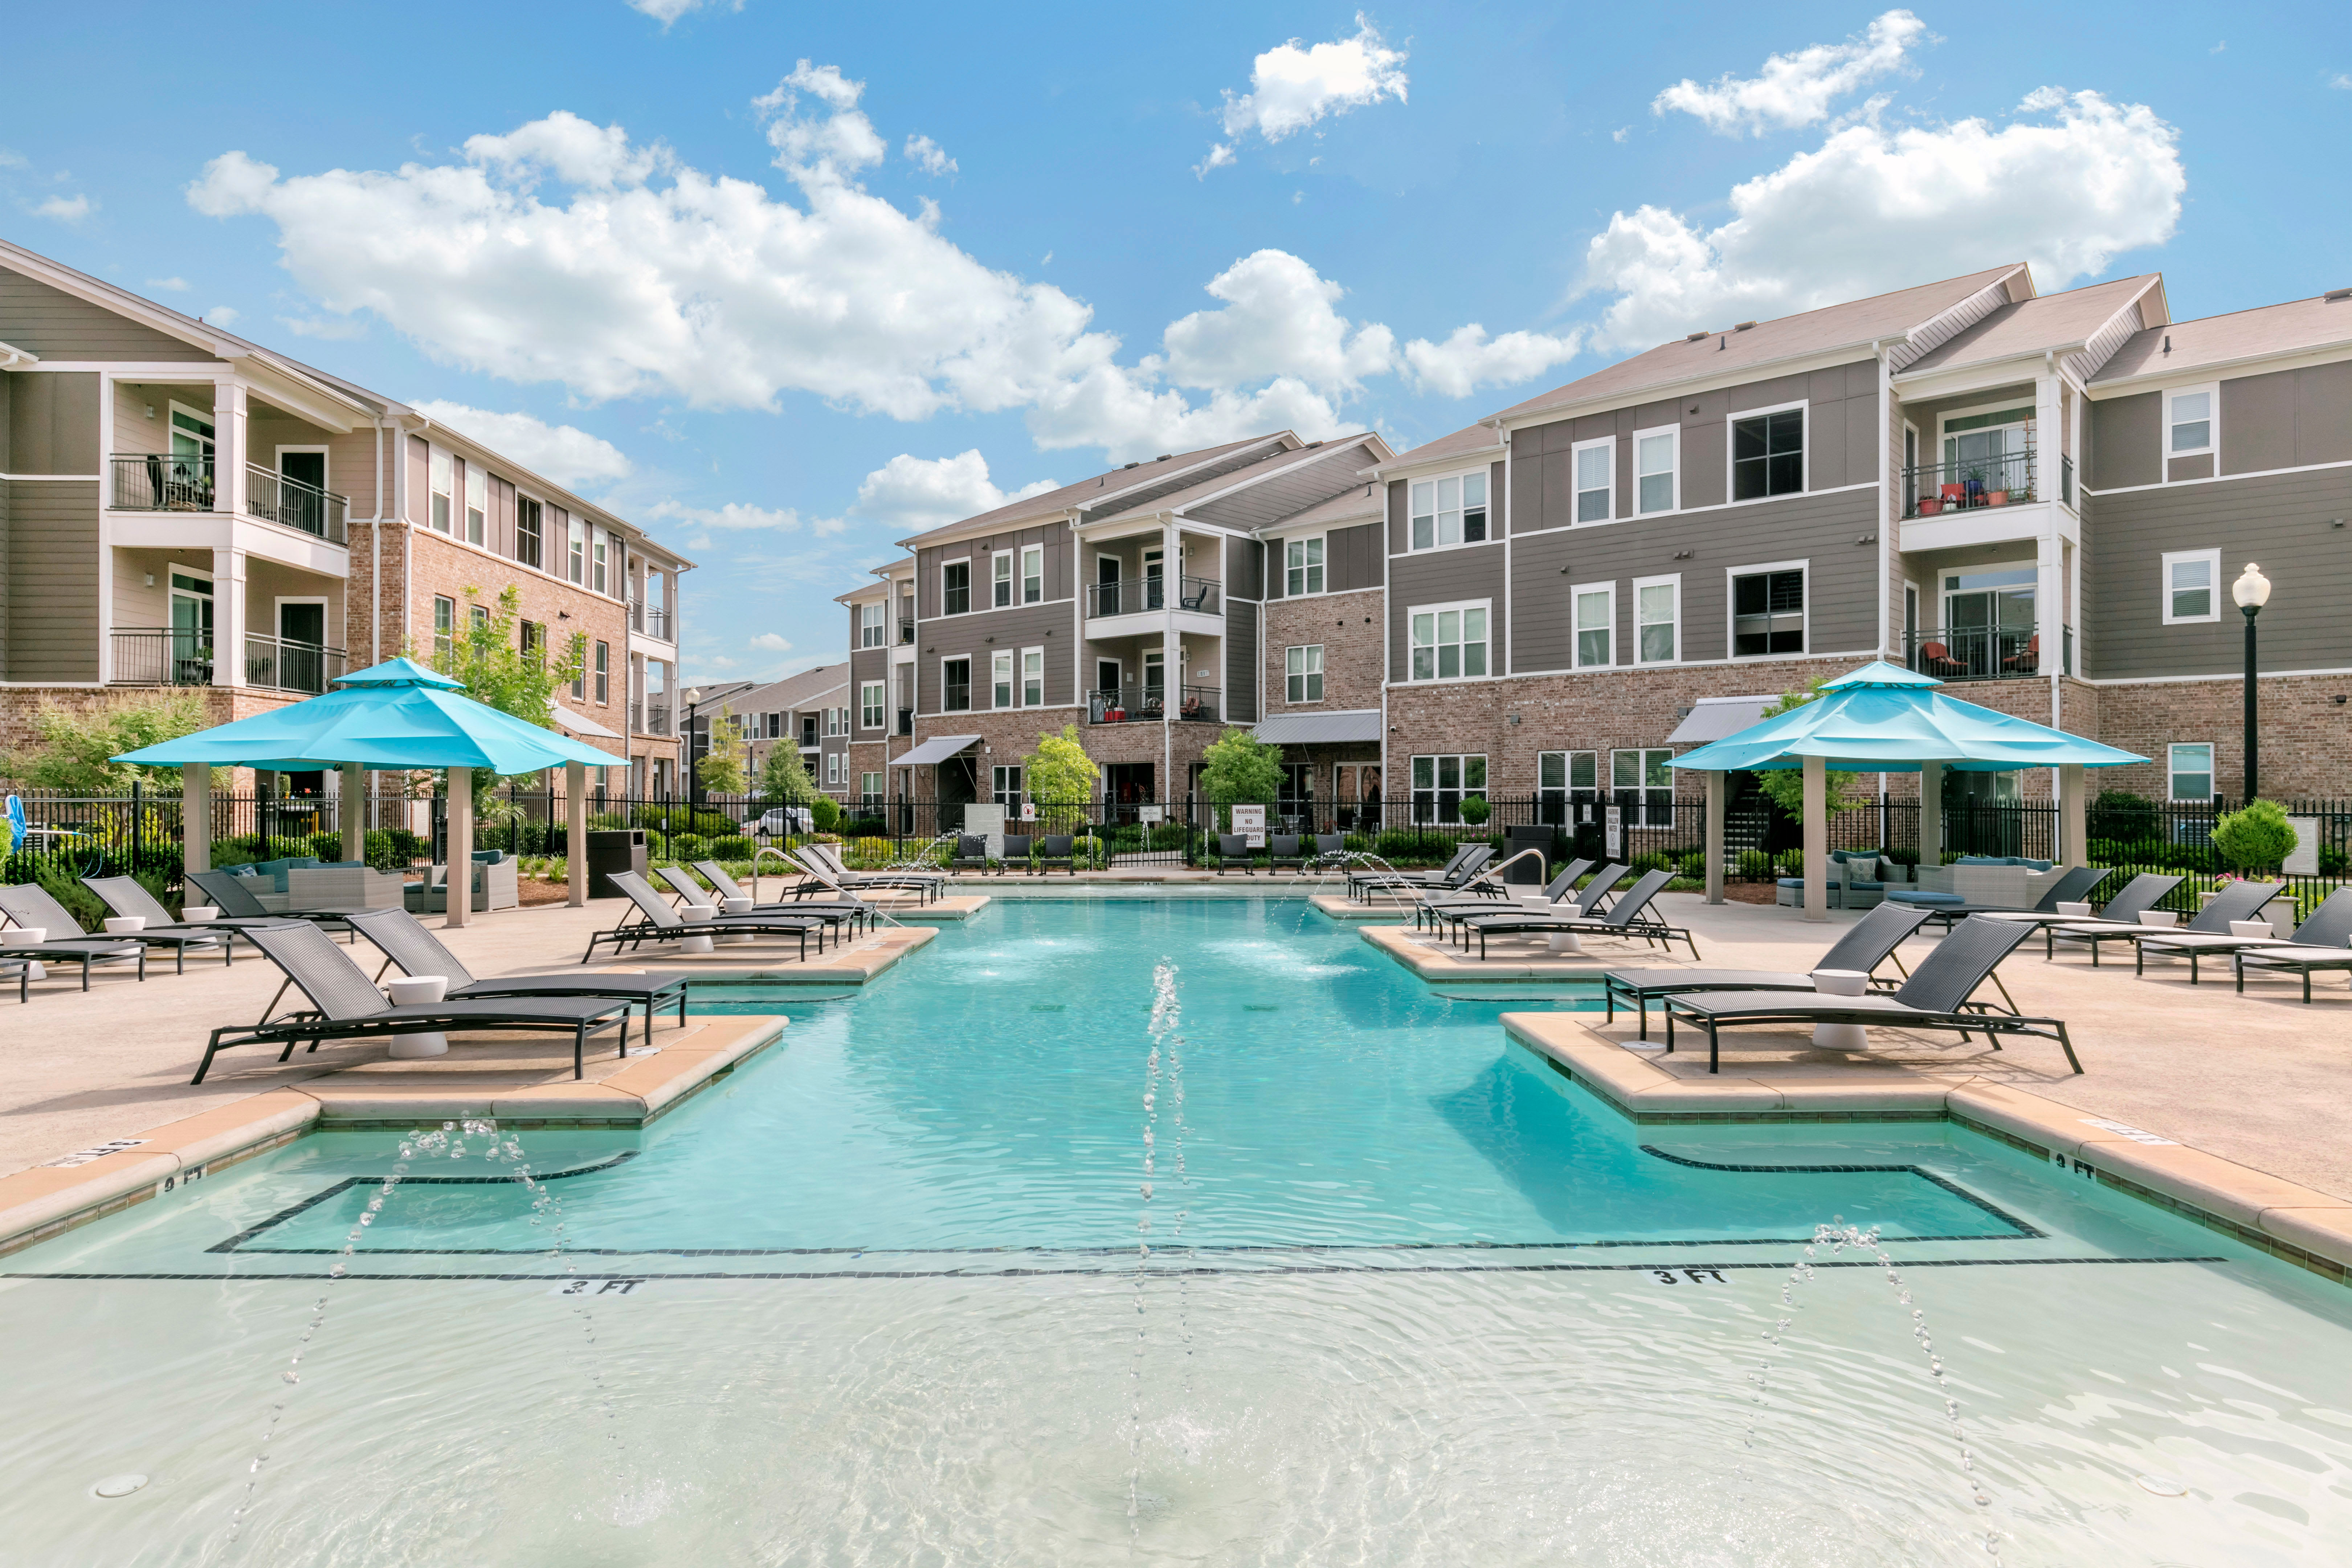 Swimming pool with poolside cabanas at The Village at Apison Pike in Ooltewah, Tennessee